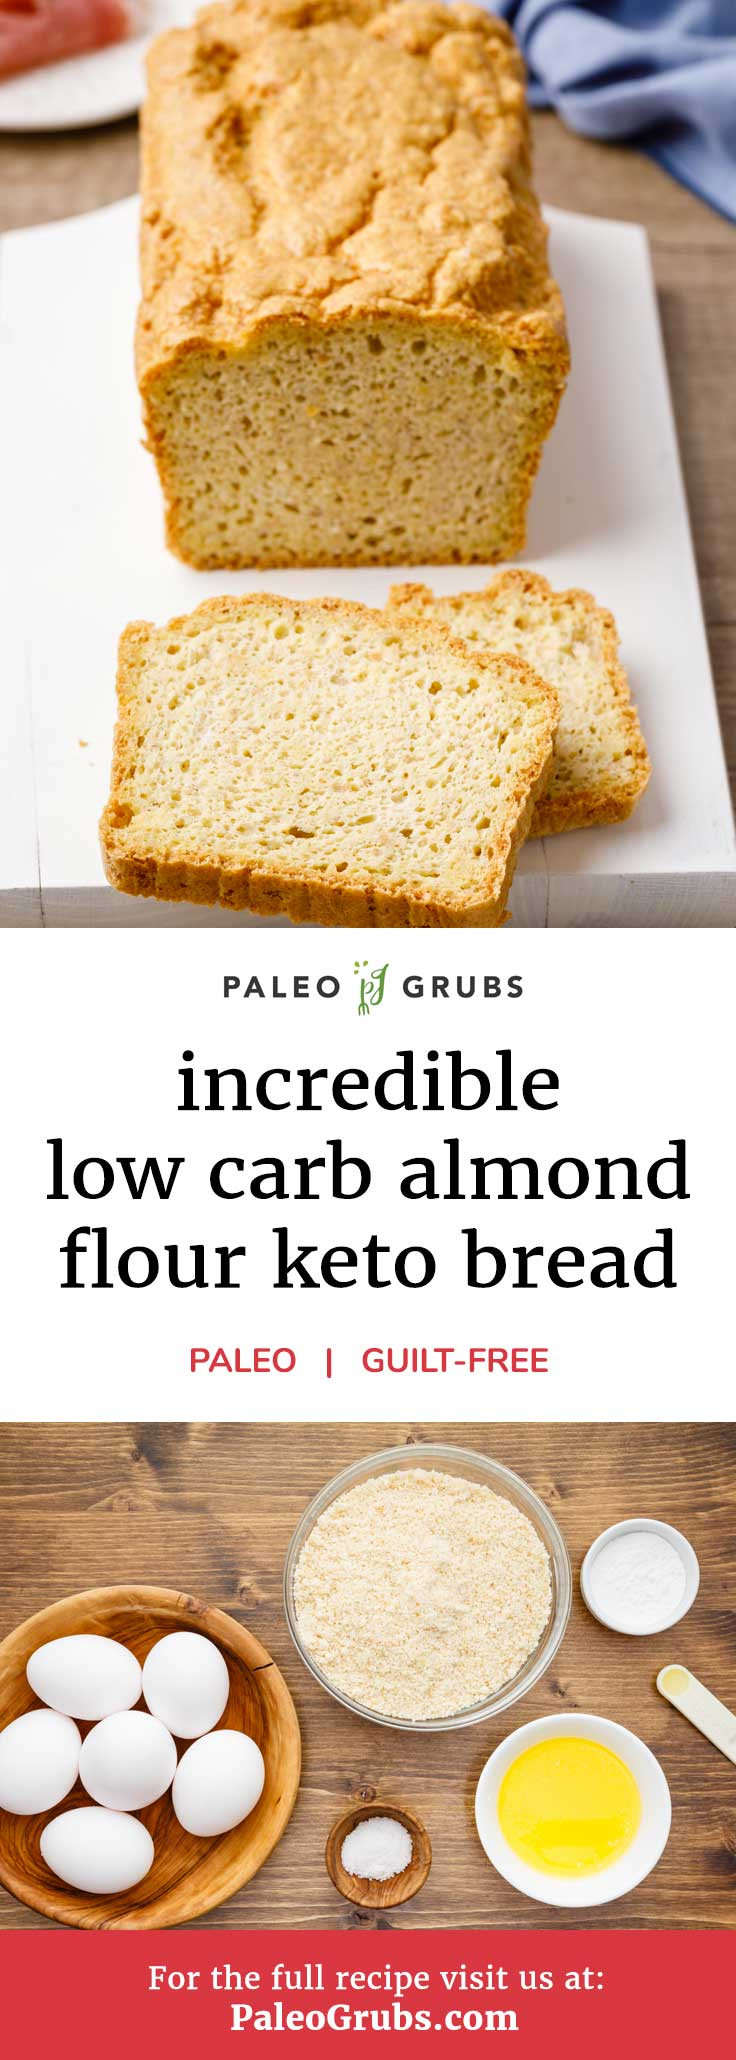 Keto Friendly Bread
 Incredible Low Carb Almond Flour Keto Bread Mom Approved